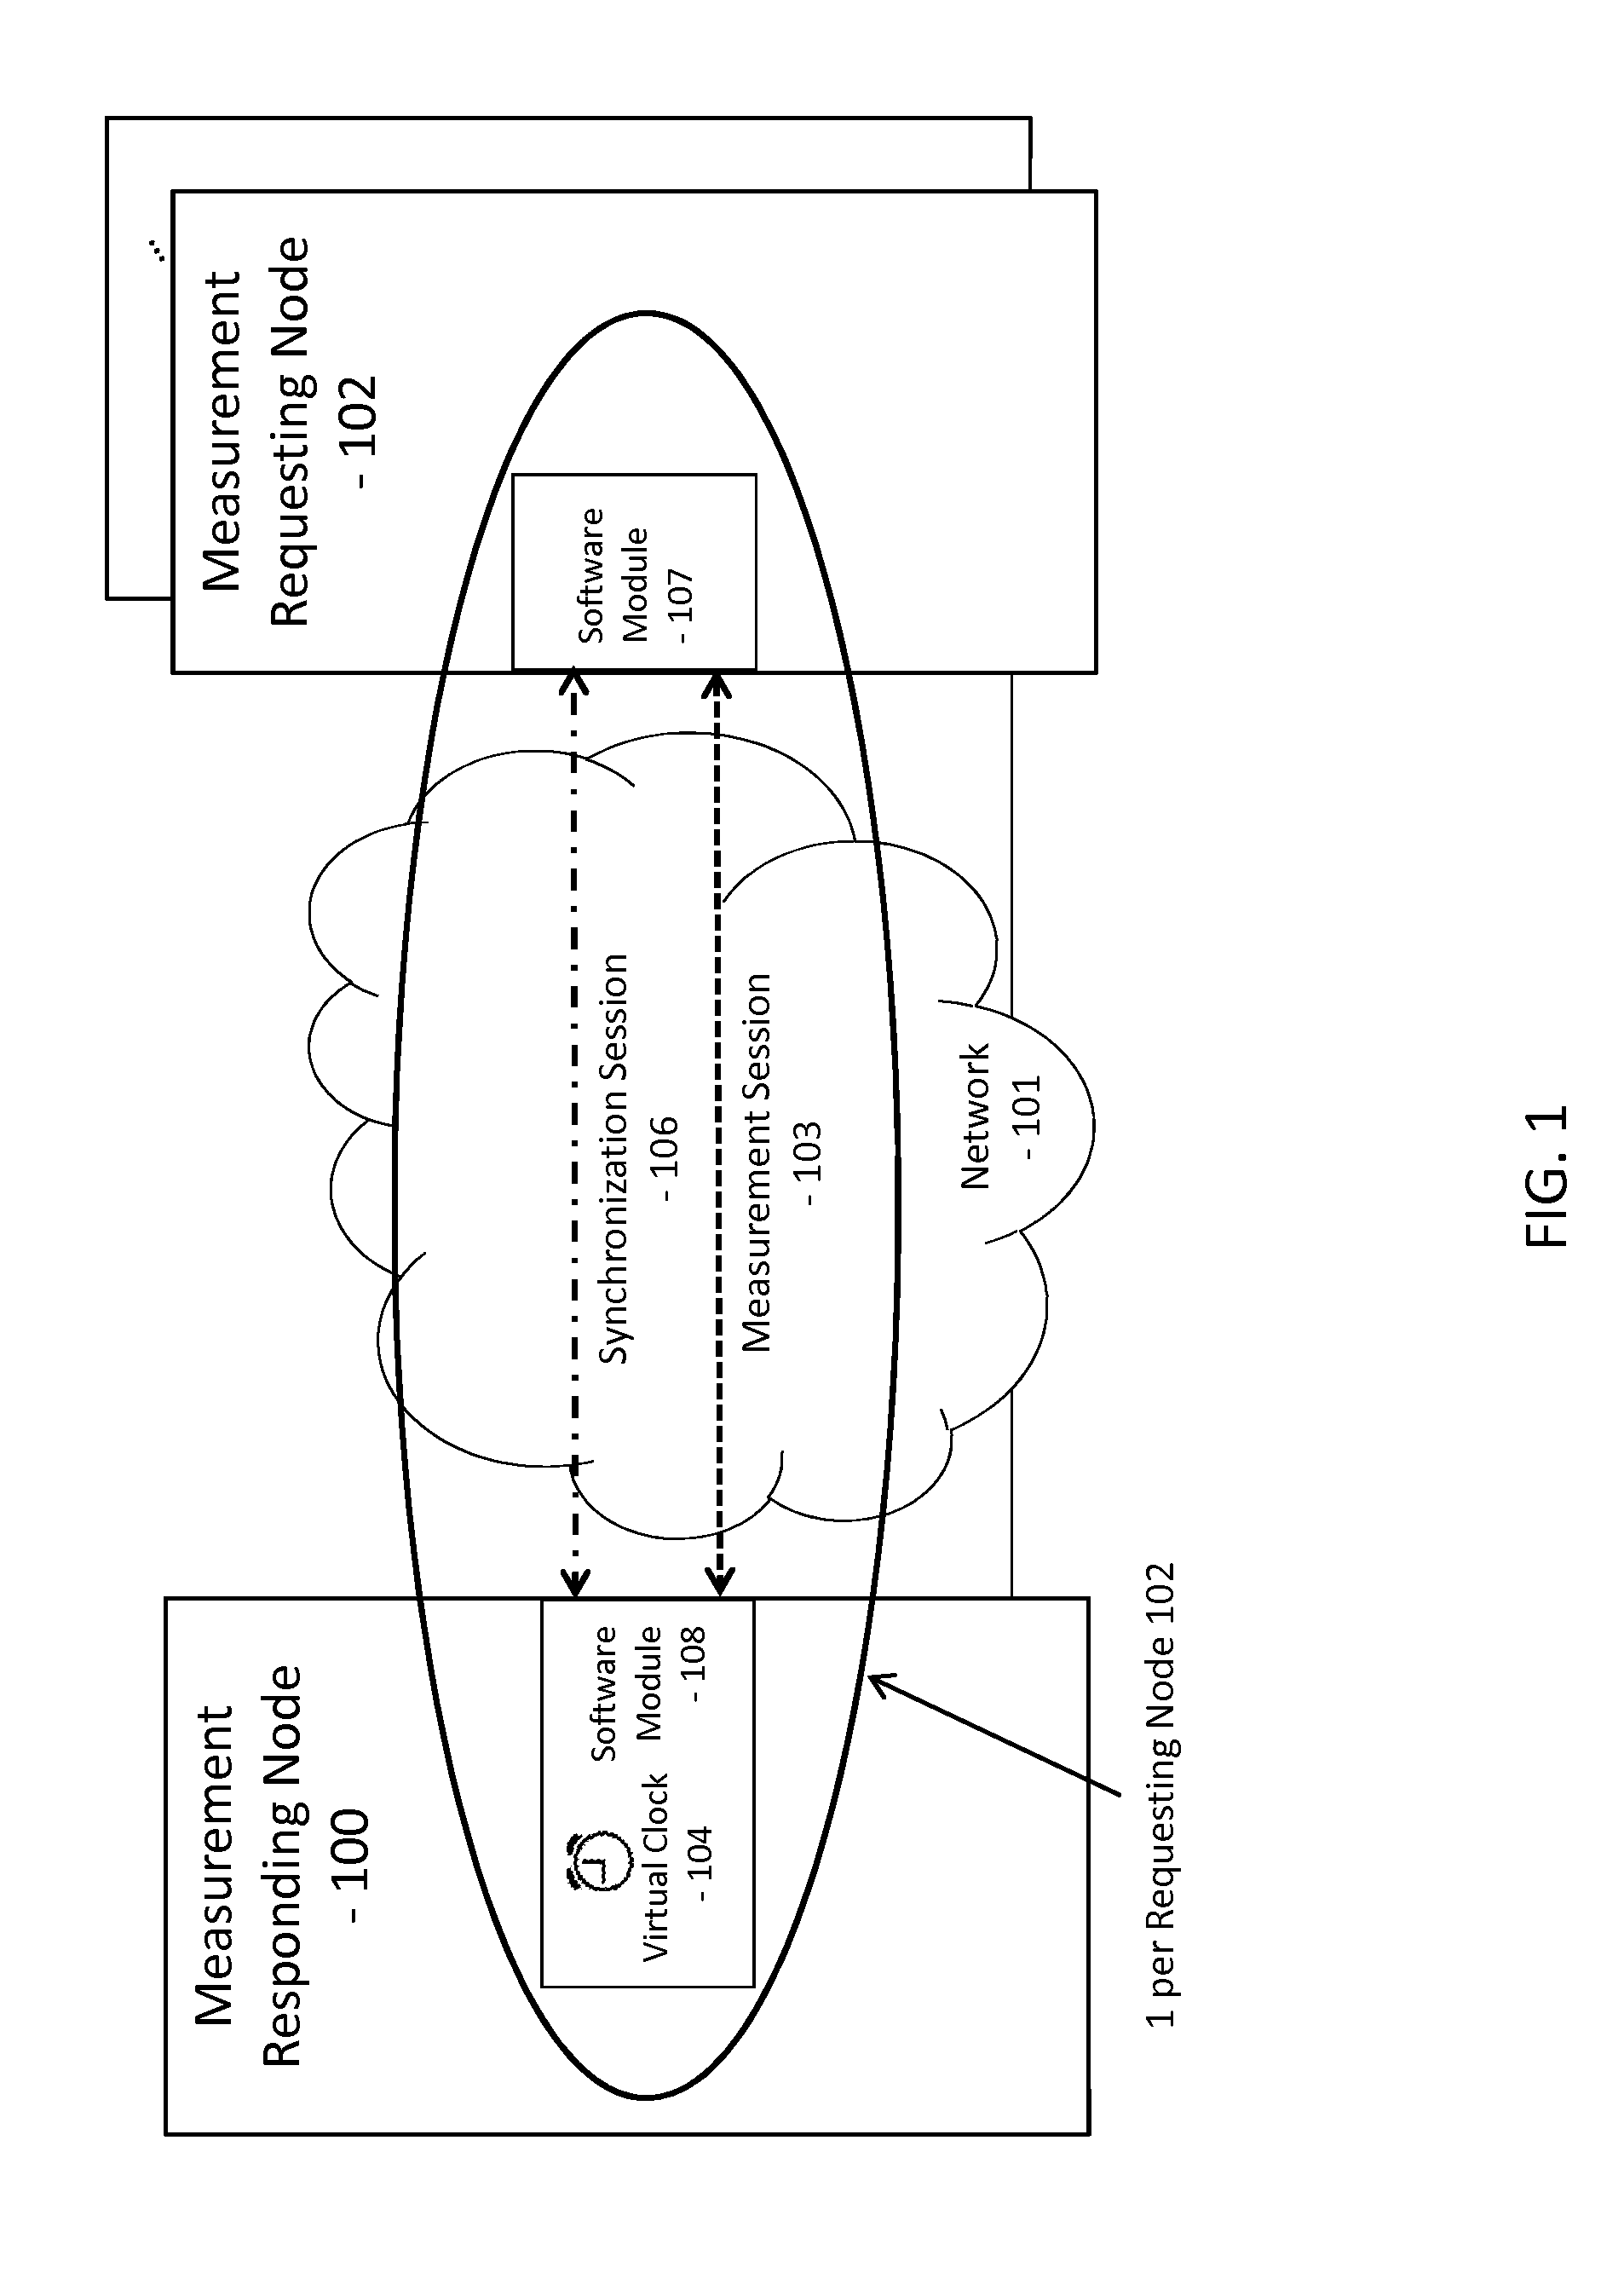 System for establishing and maintaining a clock reference indicating one-way latency in a data network